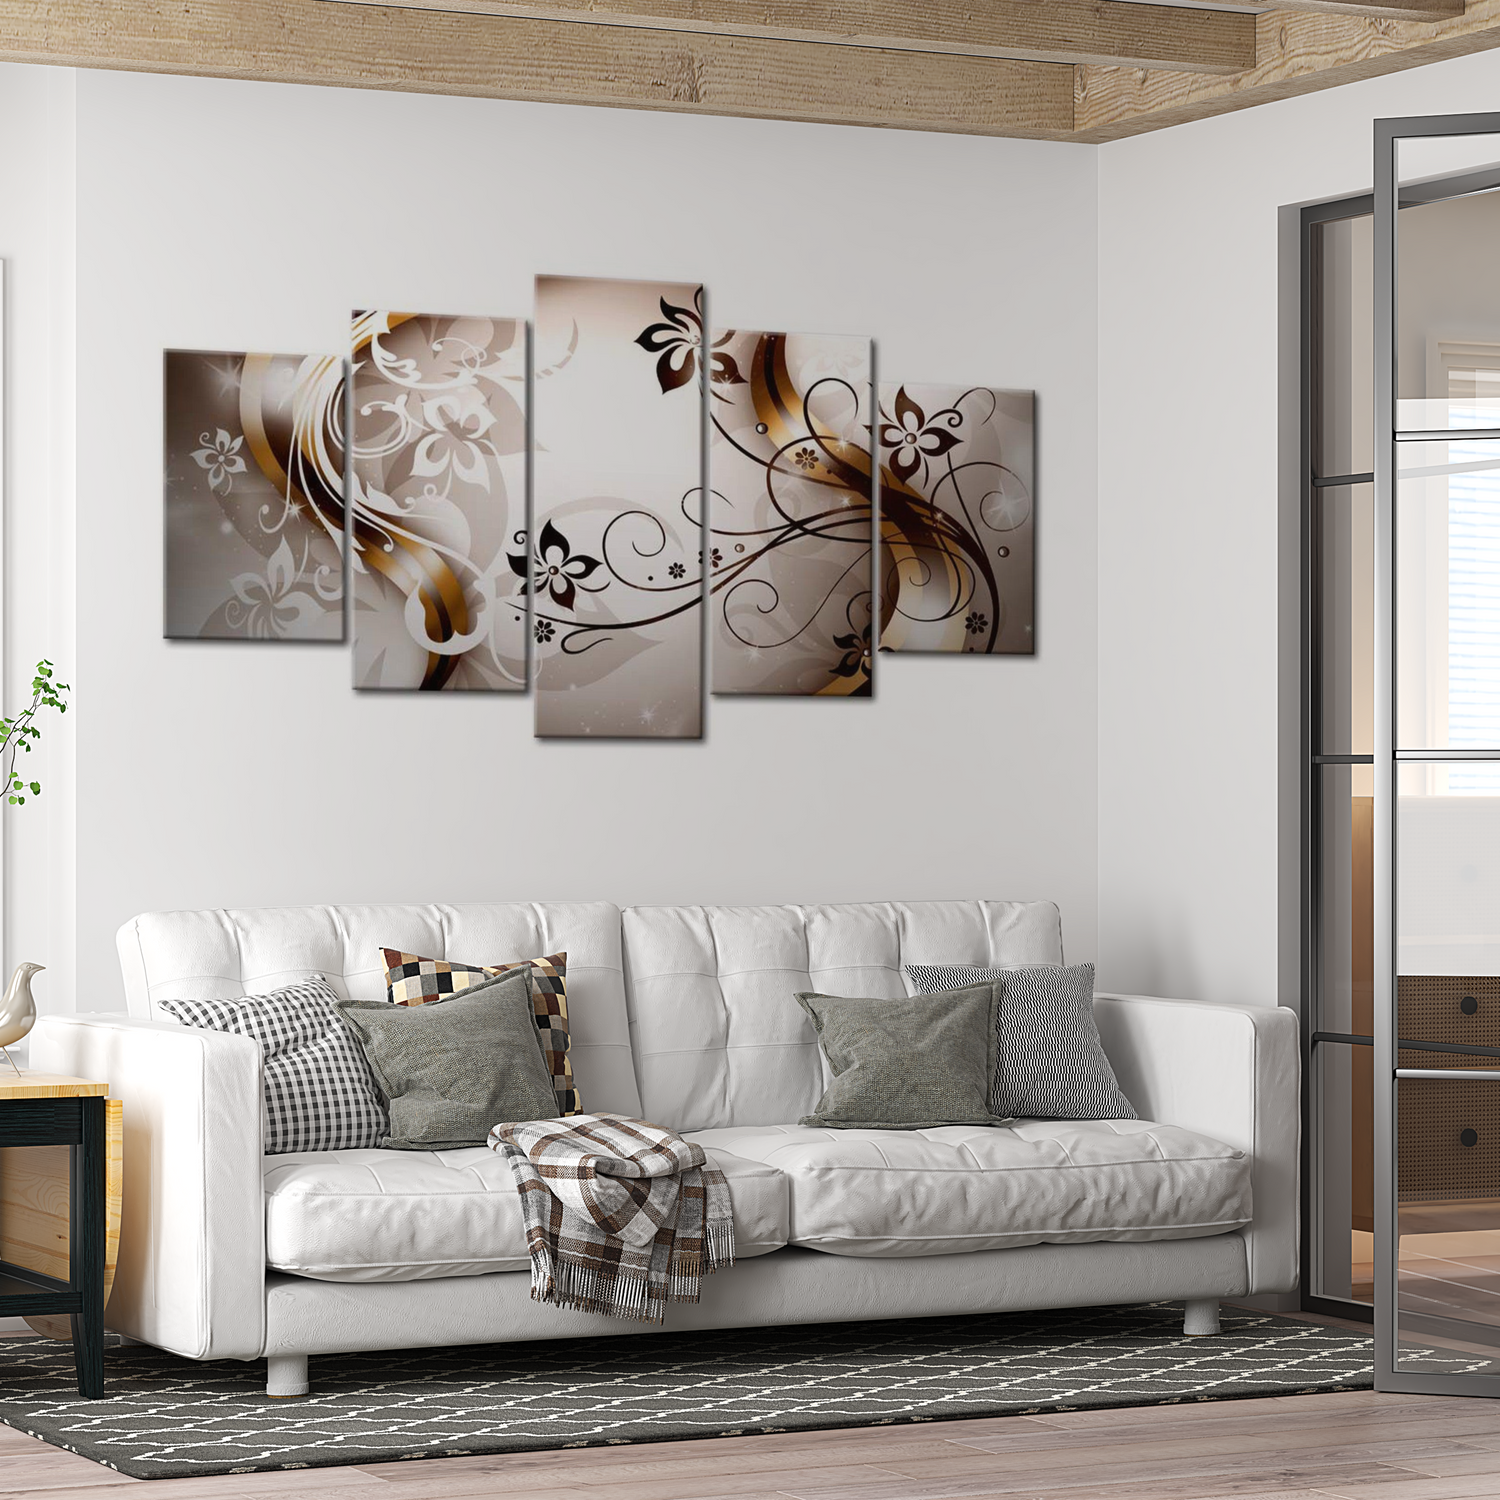 Stretched Canvas Glamour Art - Harmonious Delicacy 40"Wx20"H